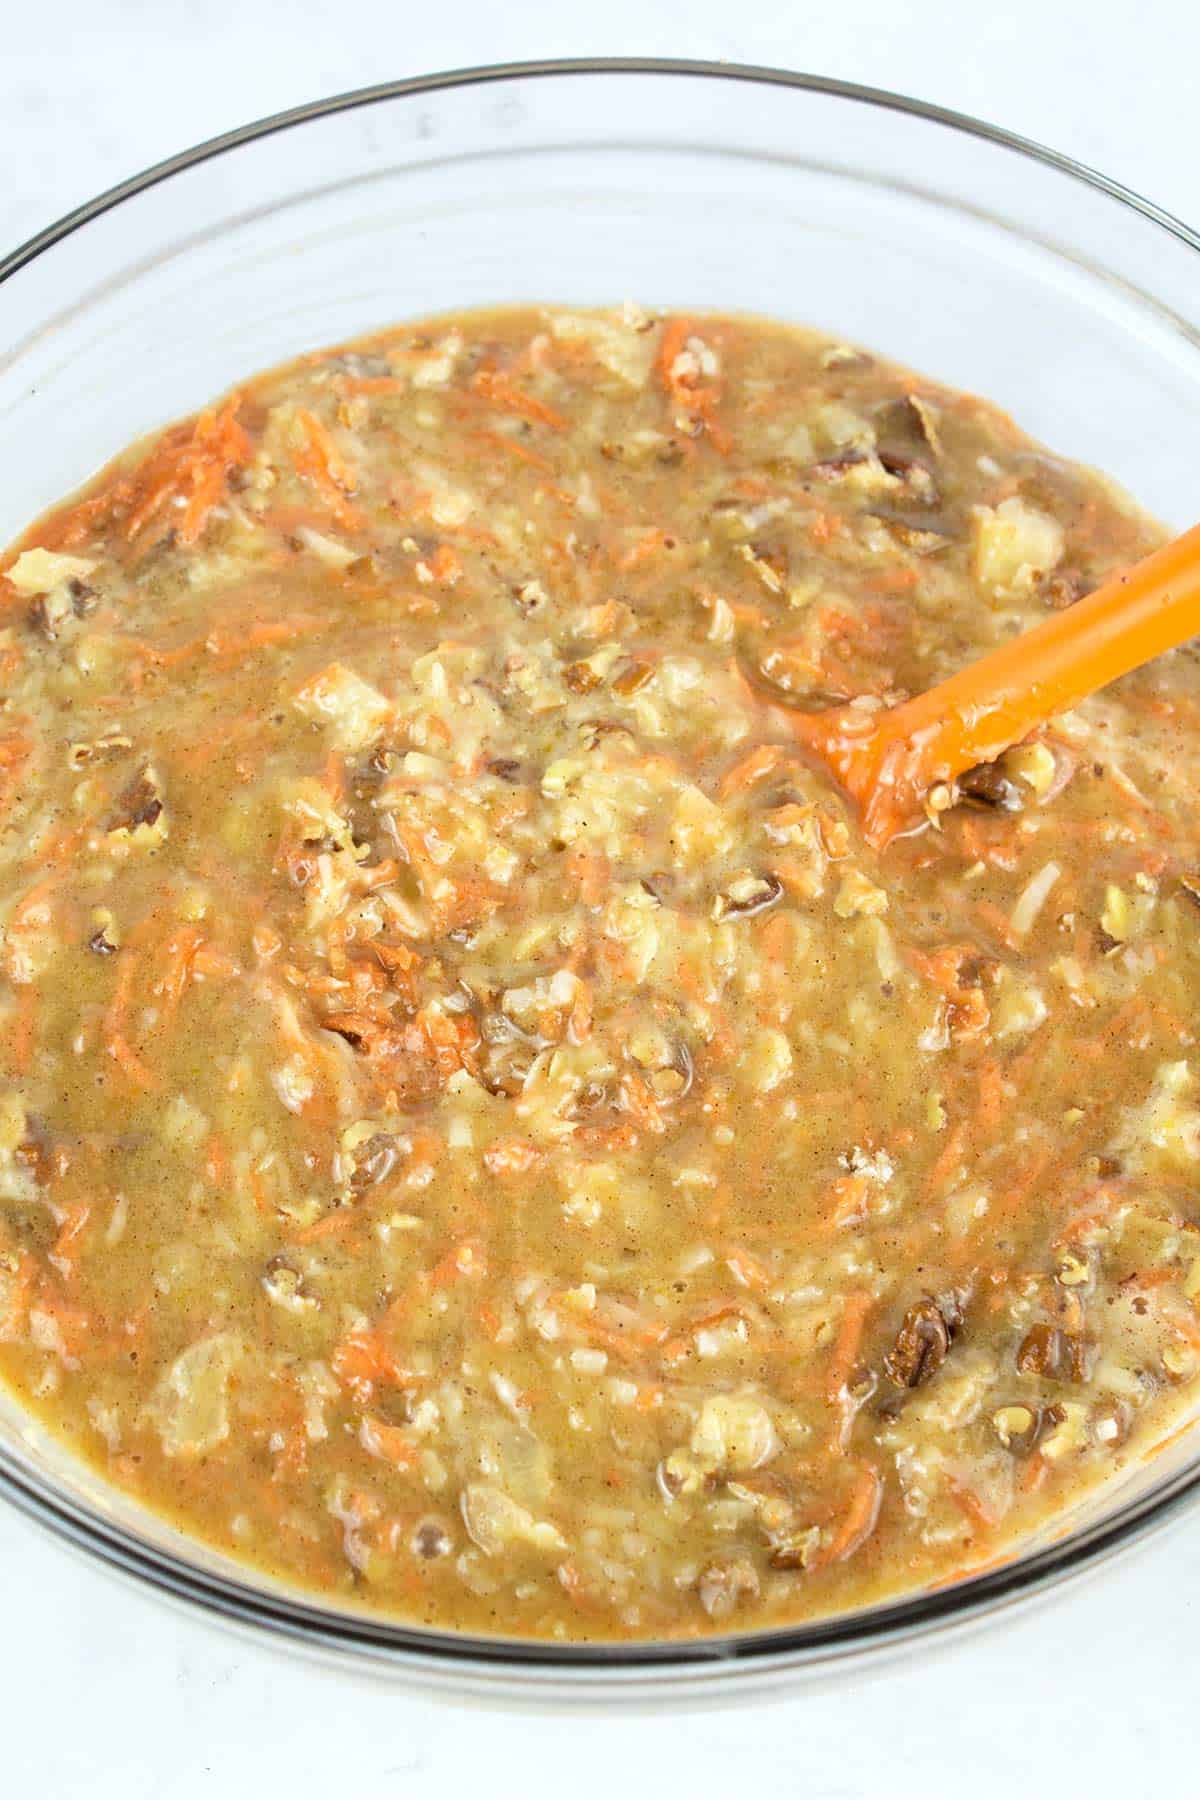 Carrots, coconut, pineapple, and pecans mixed into carrot cake batter.